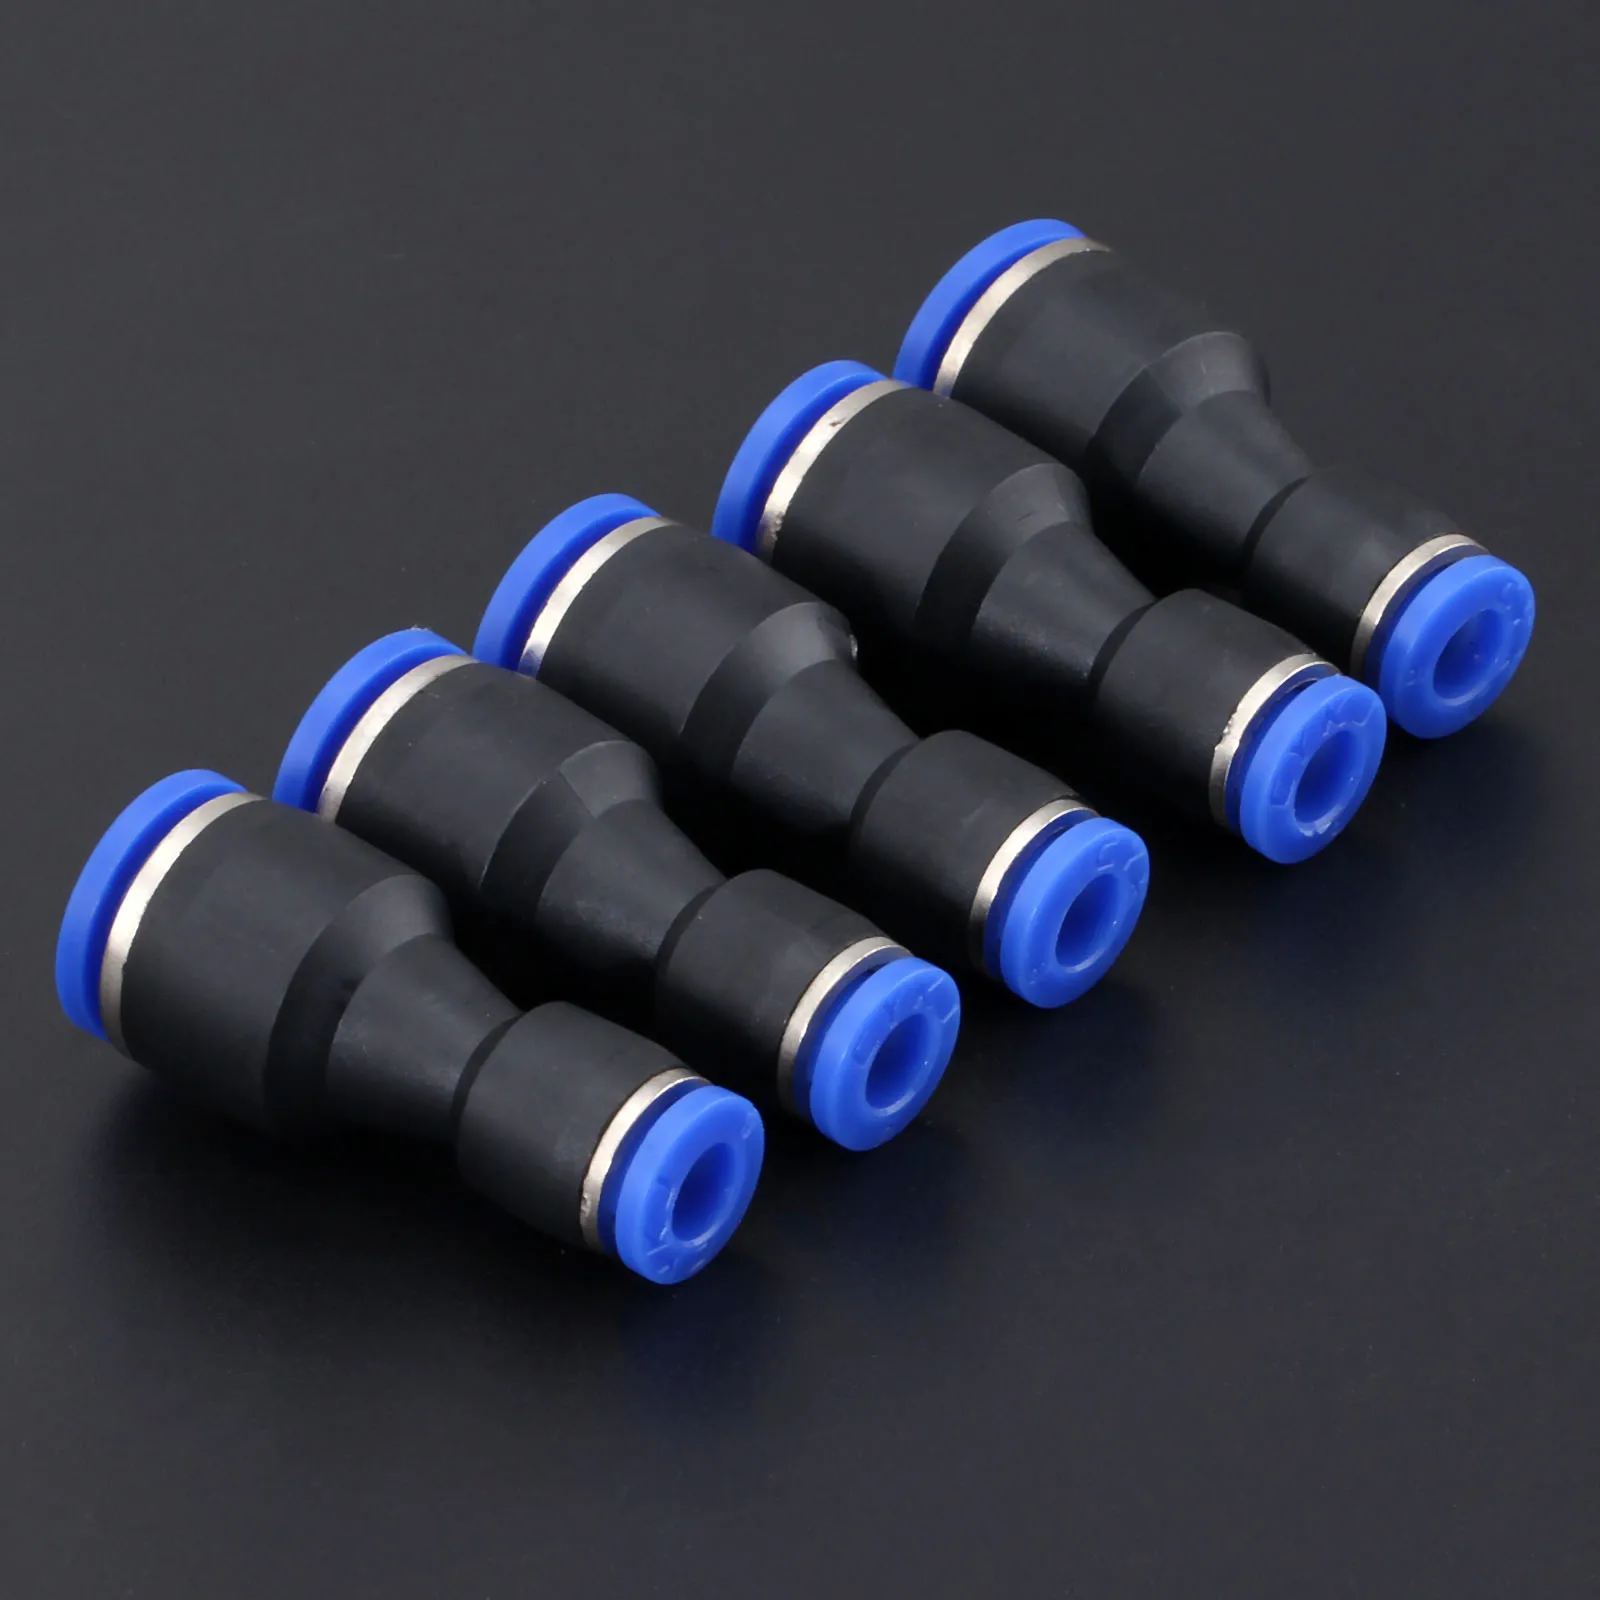 5Pcs Pneumatic Fittings Push In Straight Reducer Connectors Air Hose 10mm to 6mm 